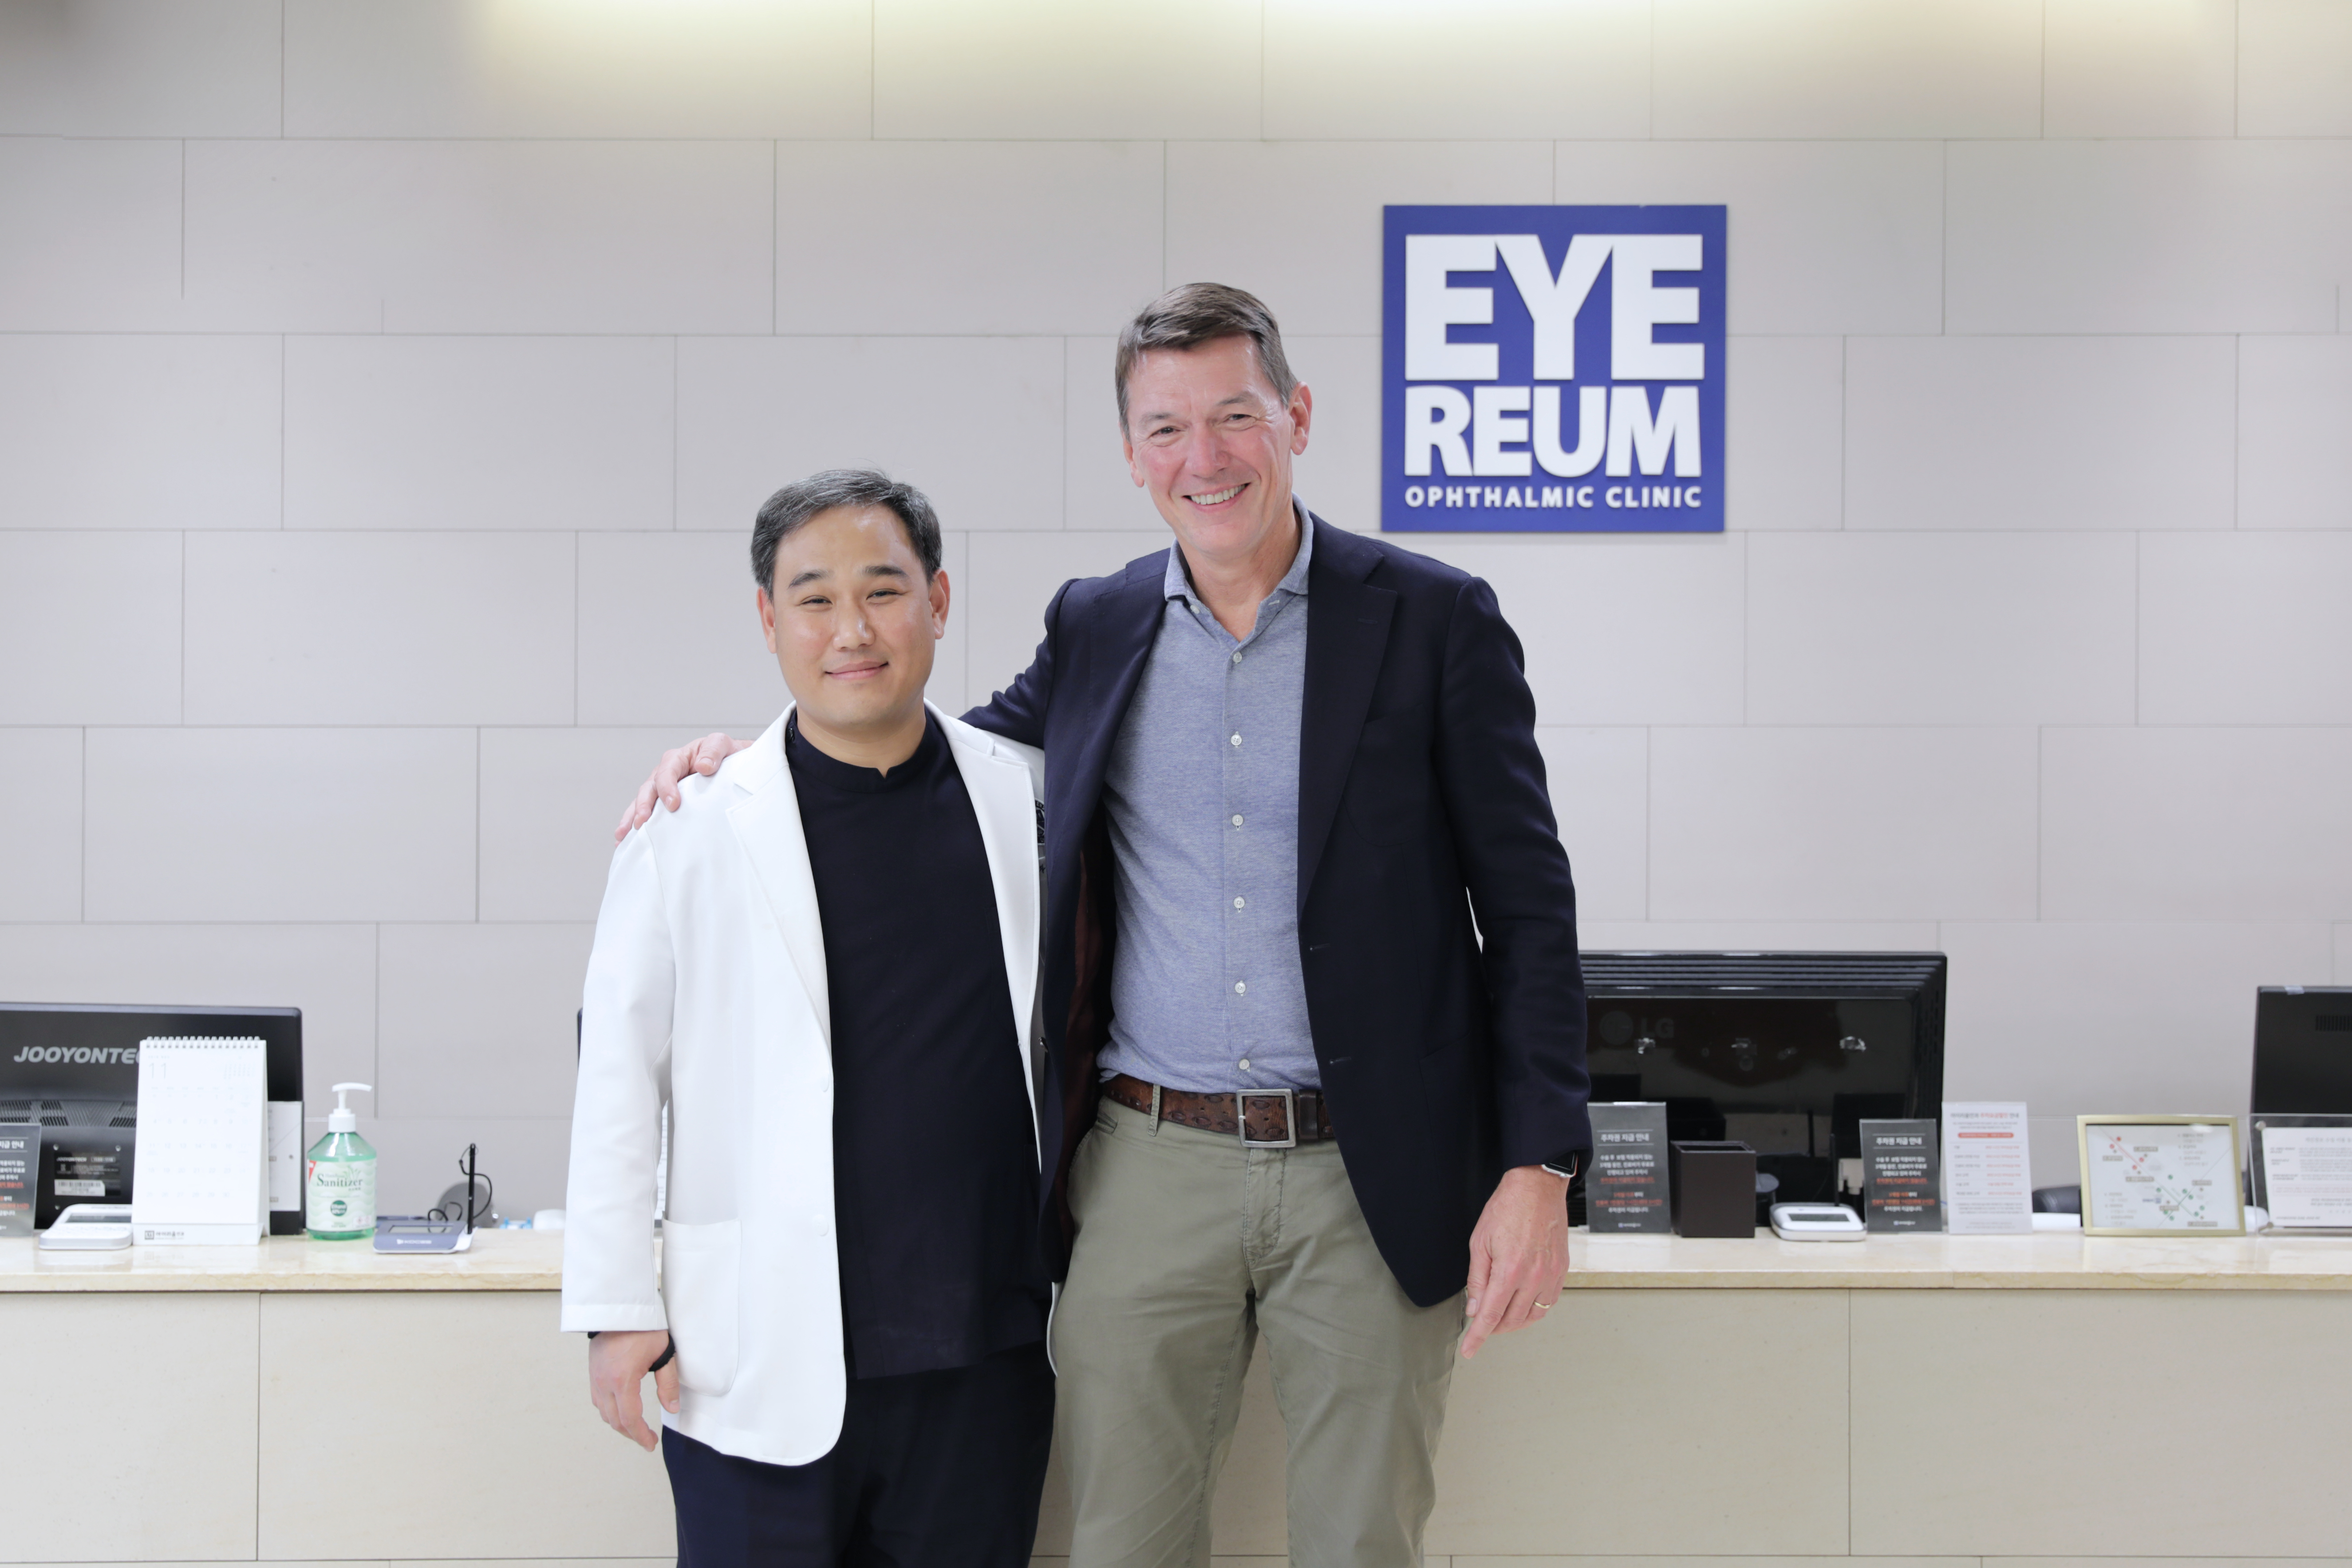 Meeting between two experts in reflective surgery! Dr. Michiel Luger visited EYEREUM from Netherlands.